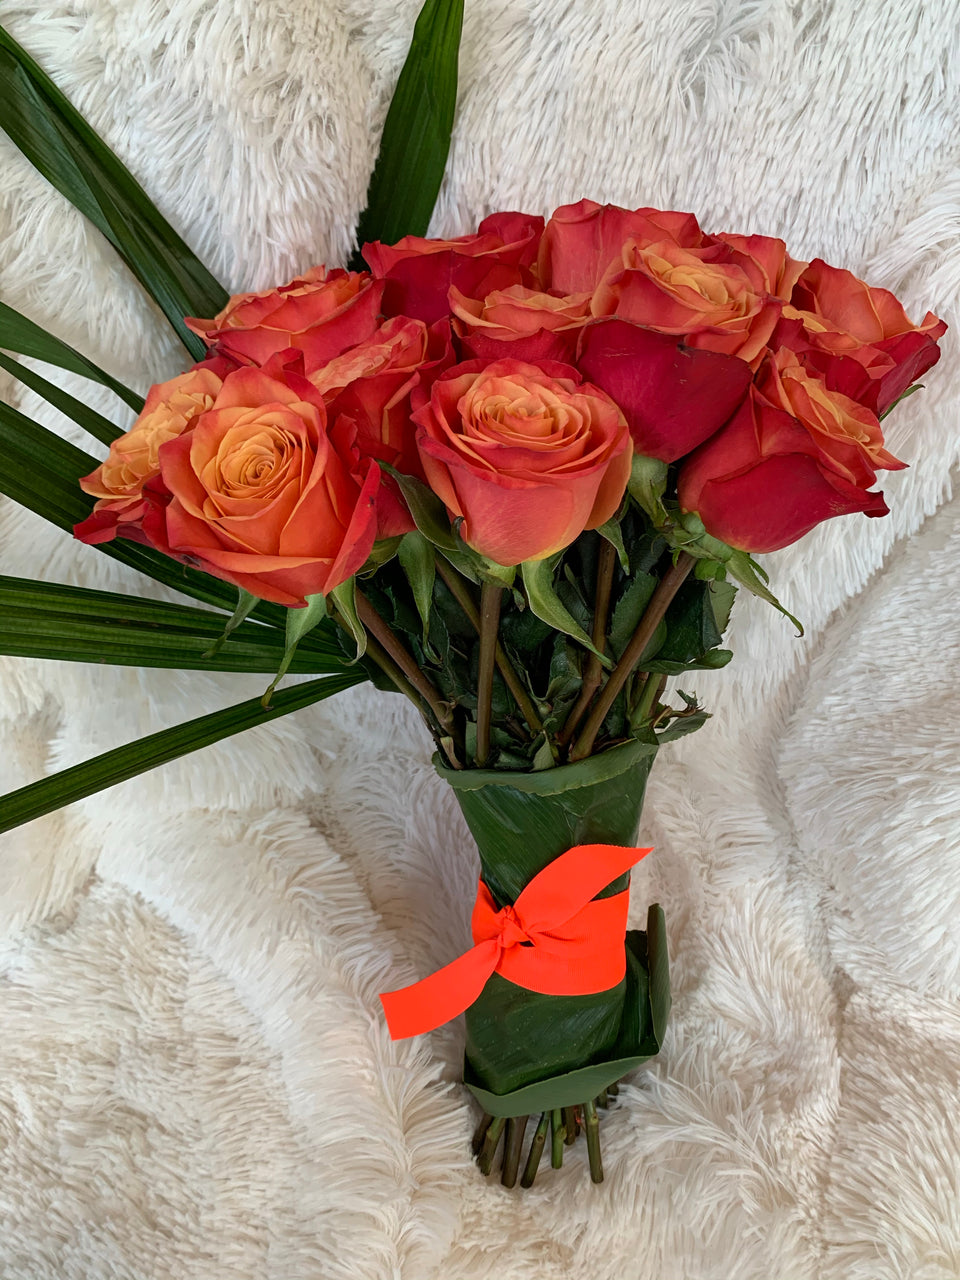 orange roses tied together with green leaves